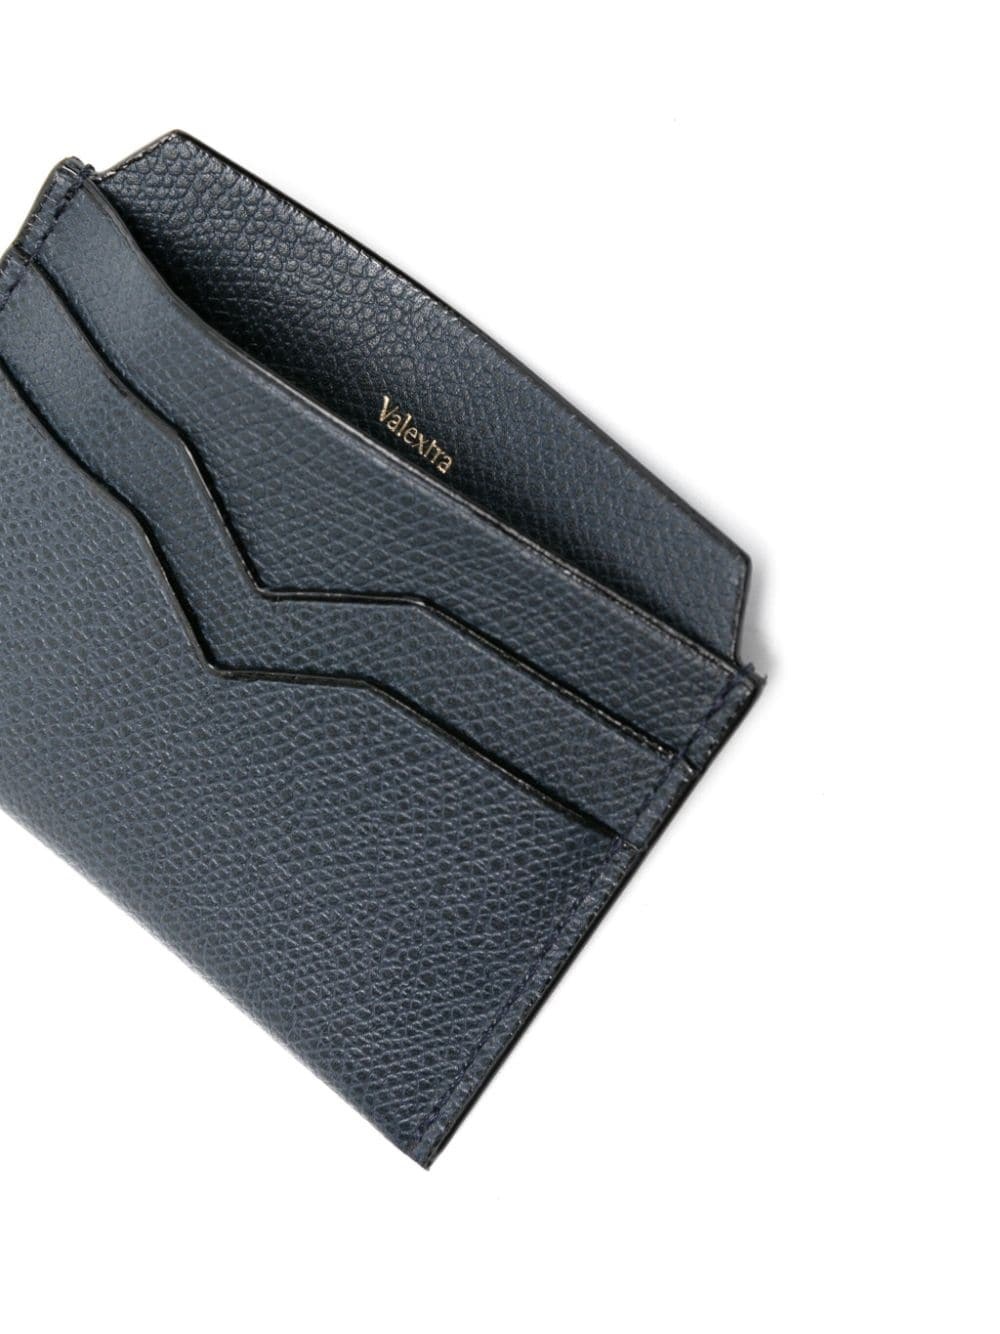 textured leather cardholder - 3